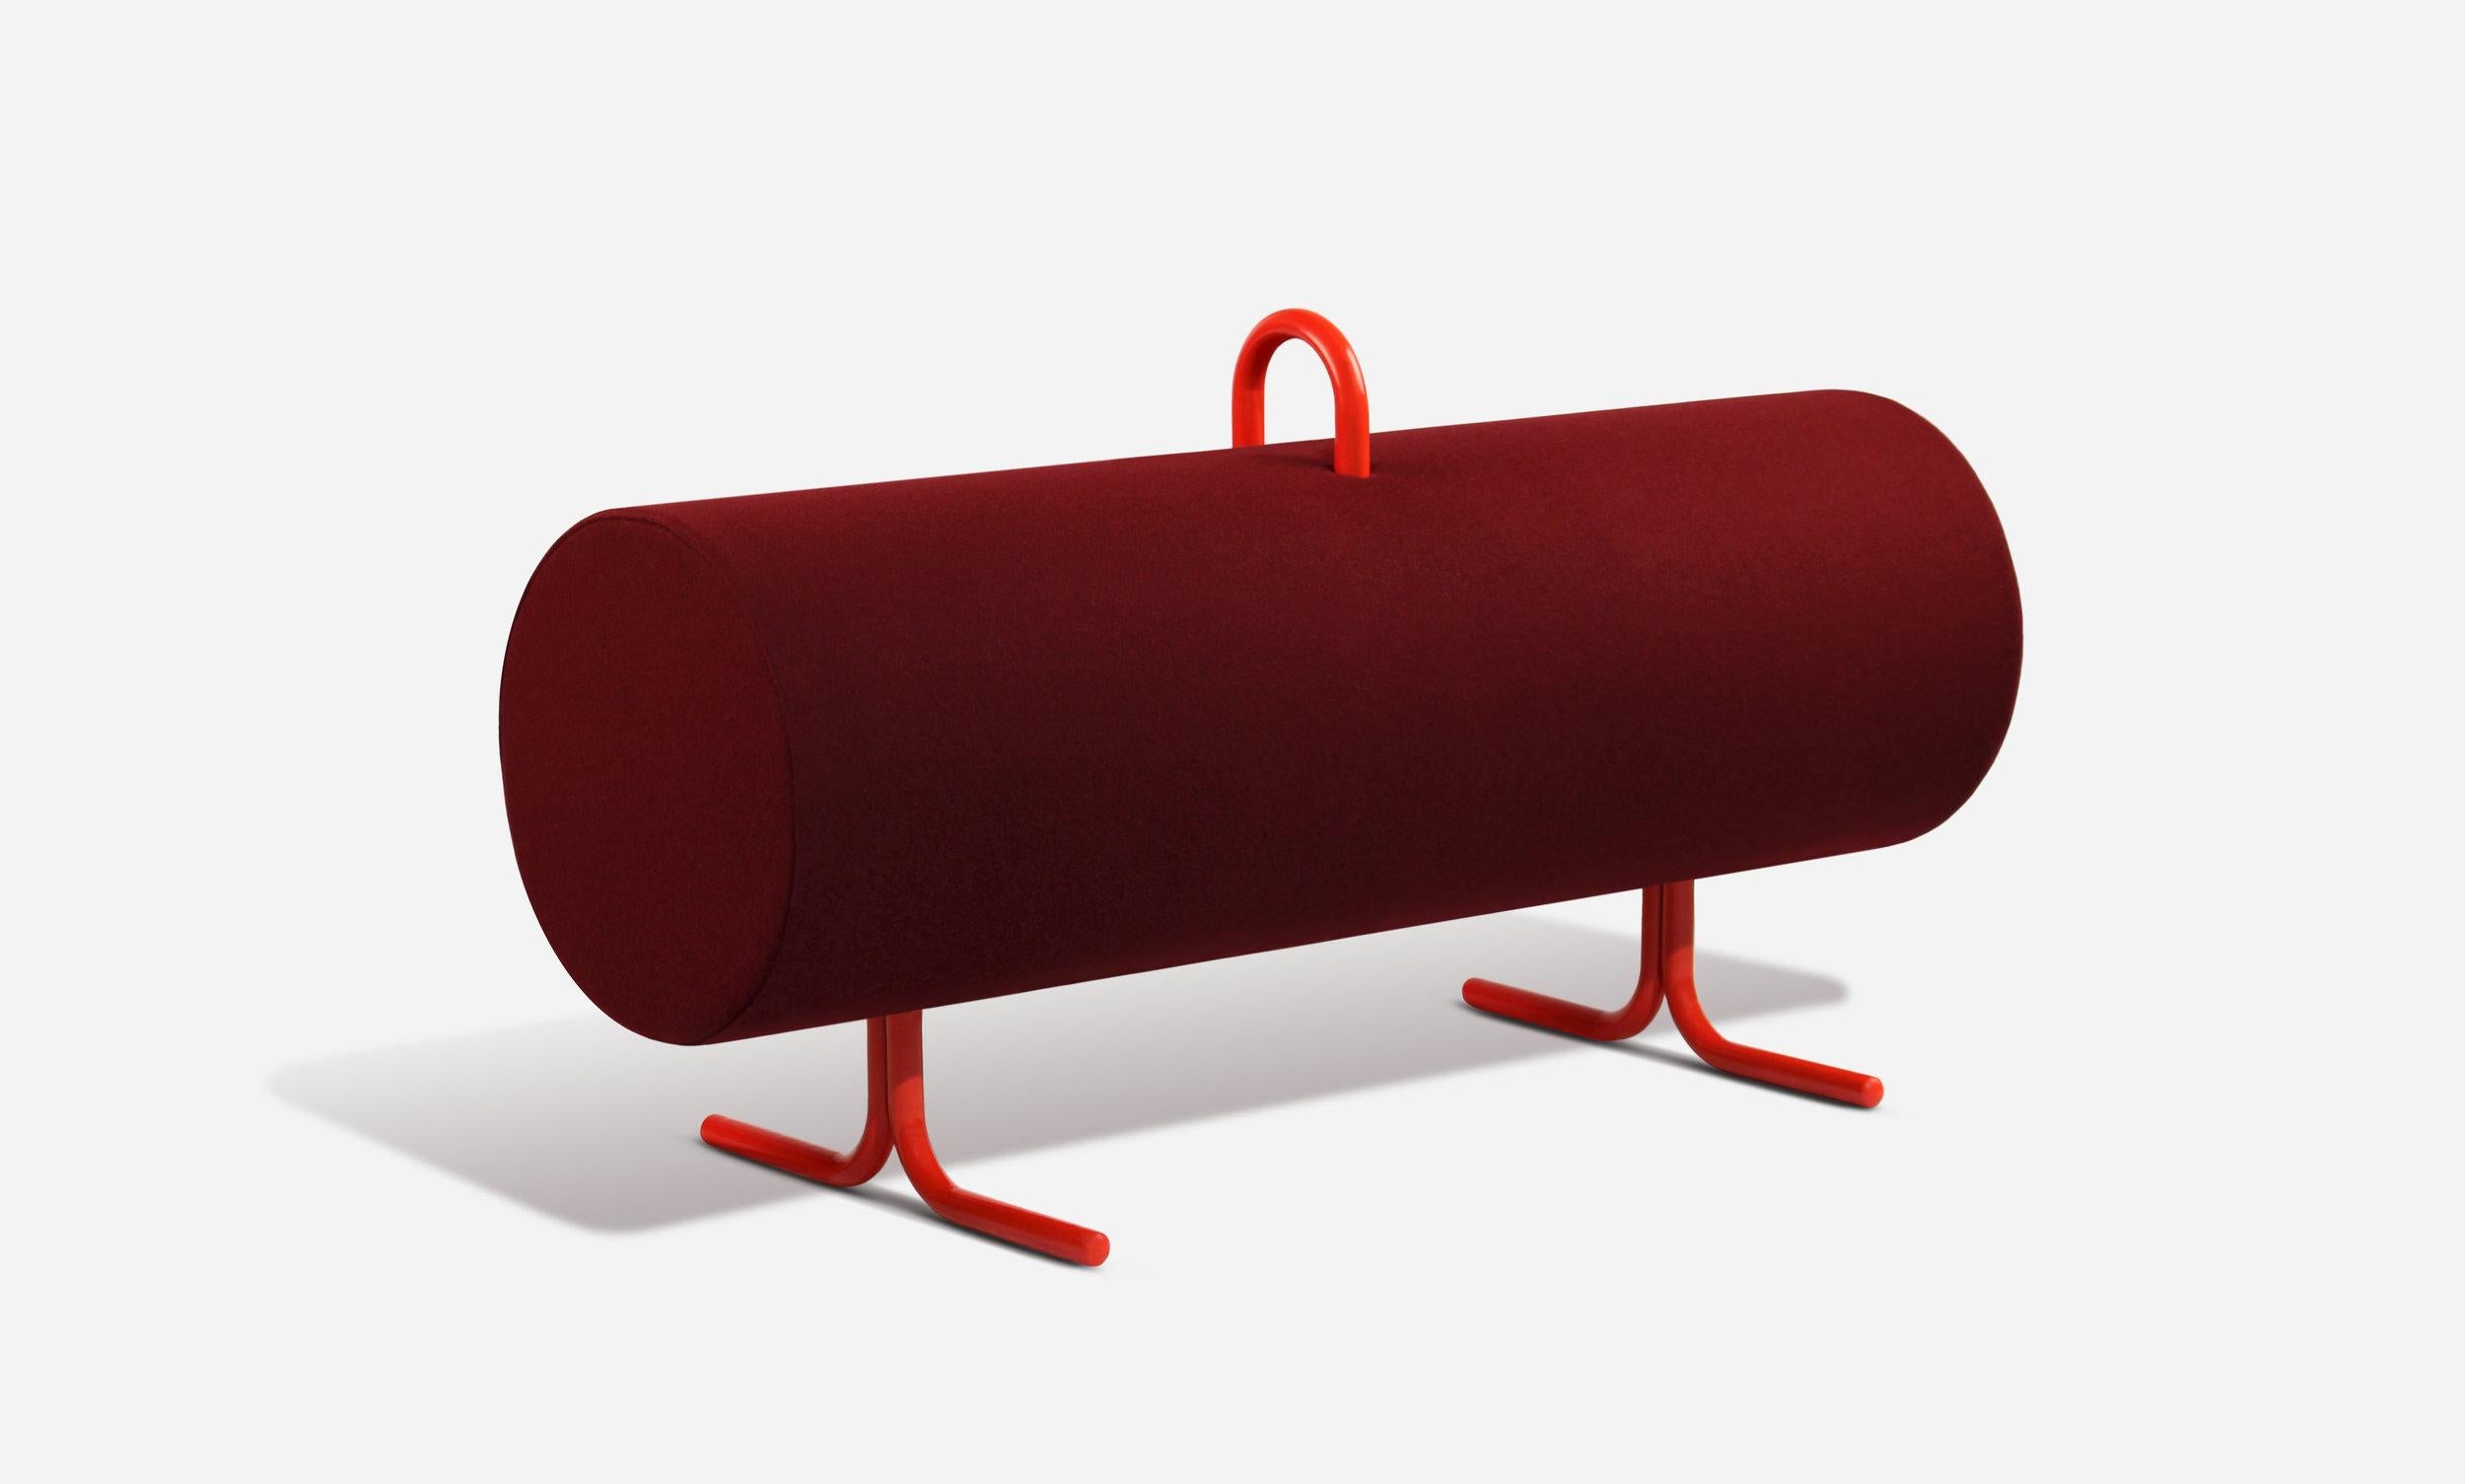 Stubbs indoor bench by Edvin Klasson
Dimensions: D120 x W45 x H60 cm
Materials: Wooden frame, cold foam, painted steel and upholstery.
Options available: The steel can be painted in most RAL colors. Upholstery textile can be any color from Tonus